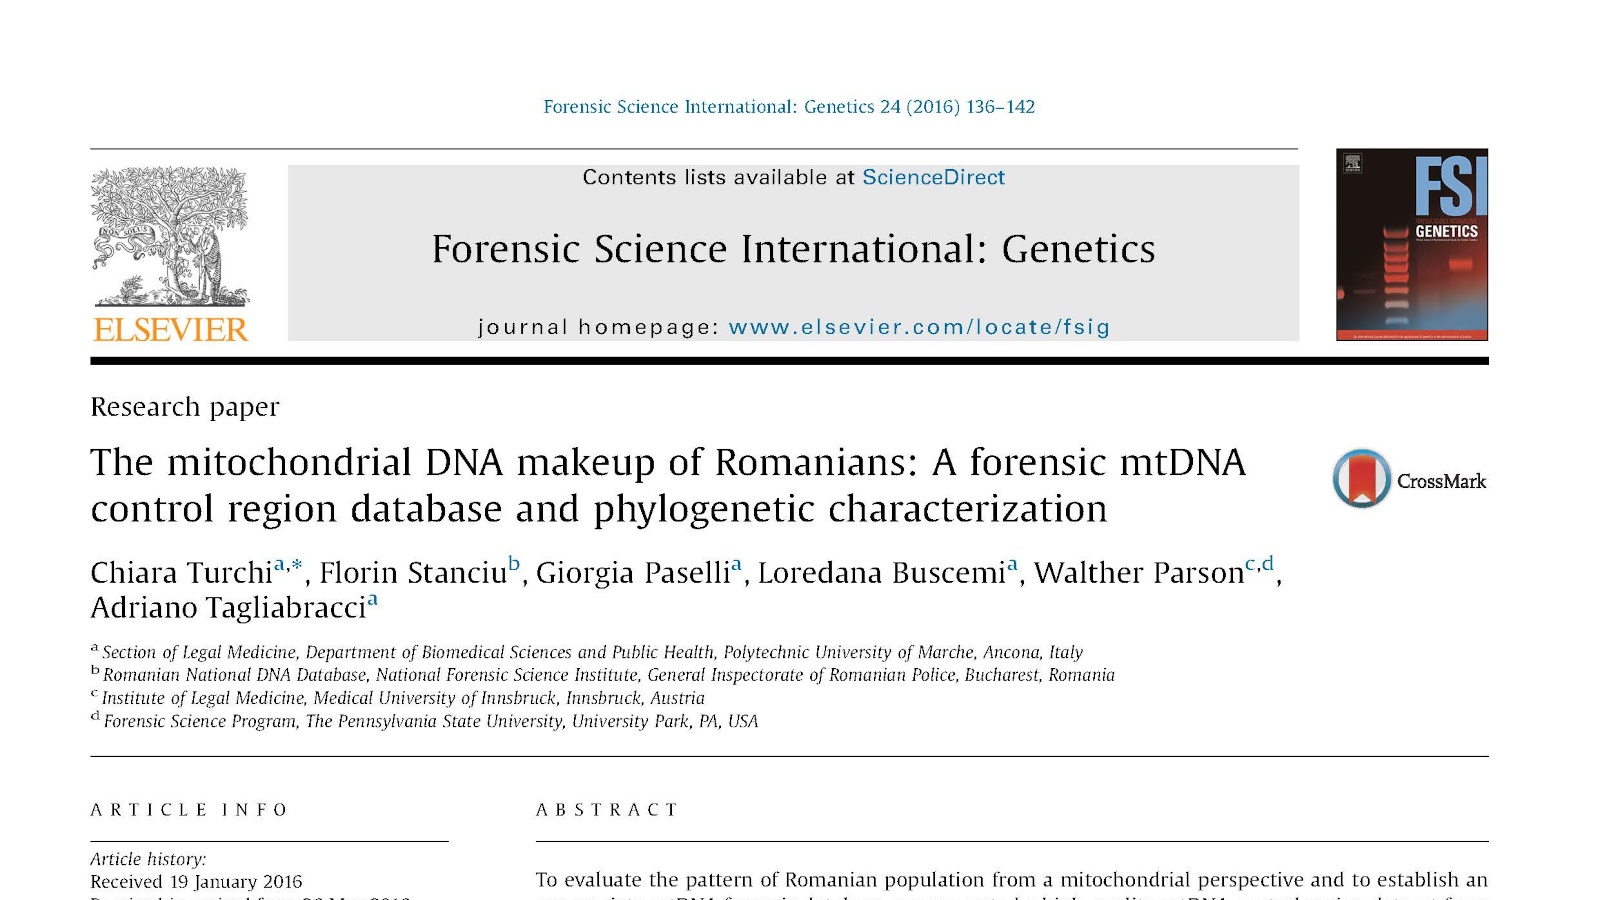 2016 - The mitochondrial DNA makeup of Romanians A forensic mtDNA control region database and phylogenetic characterization